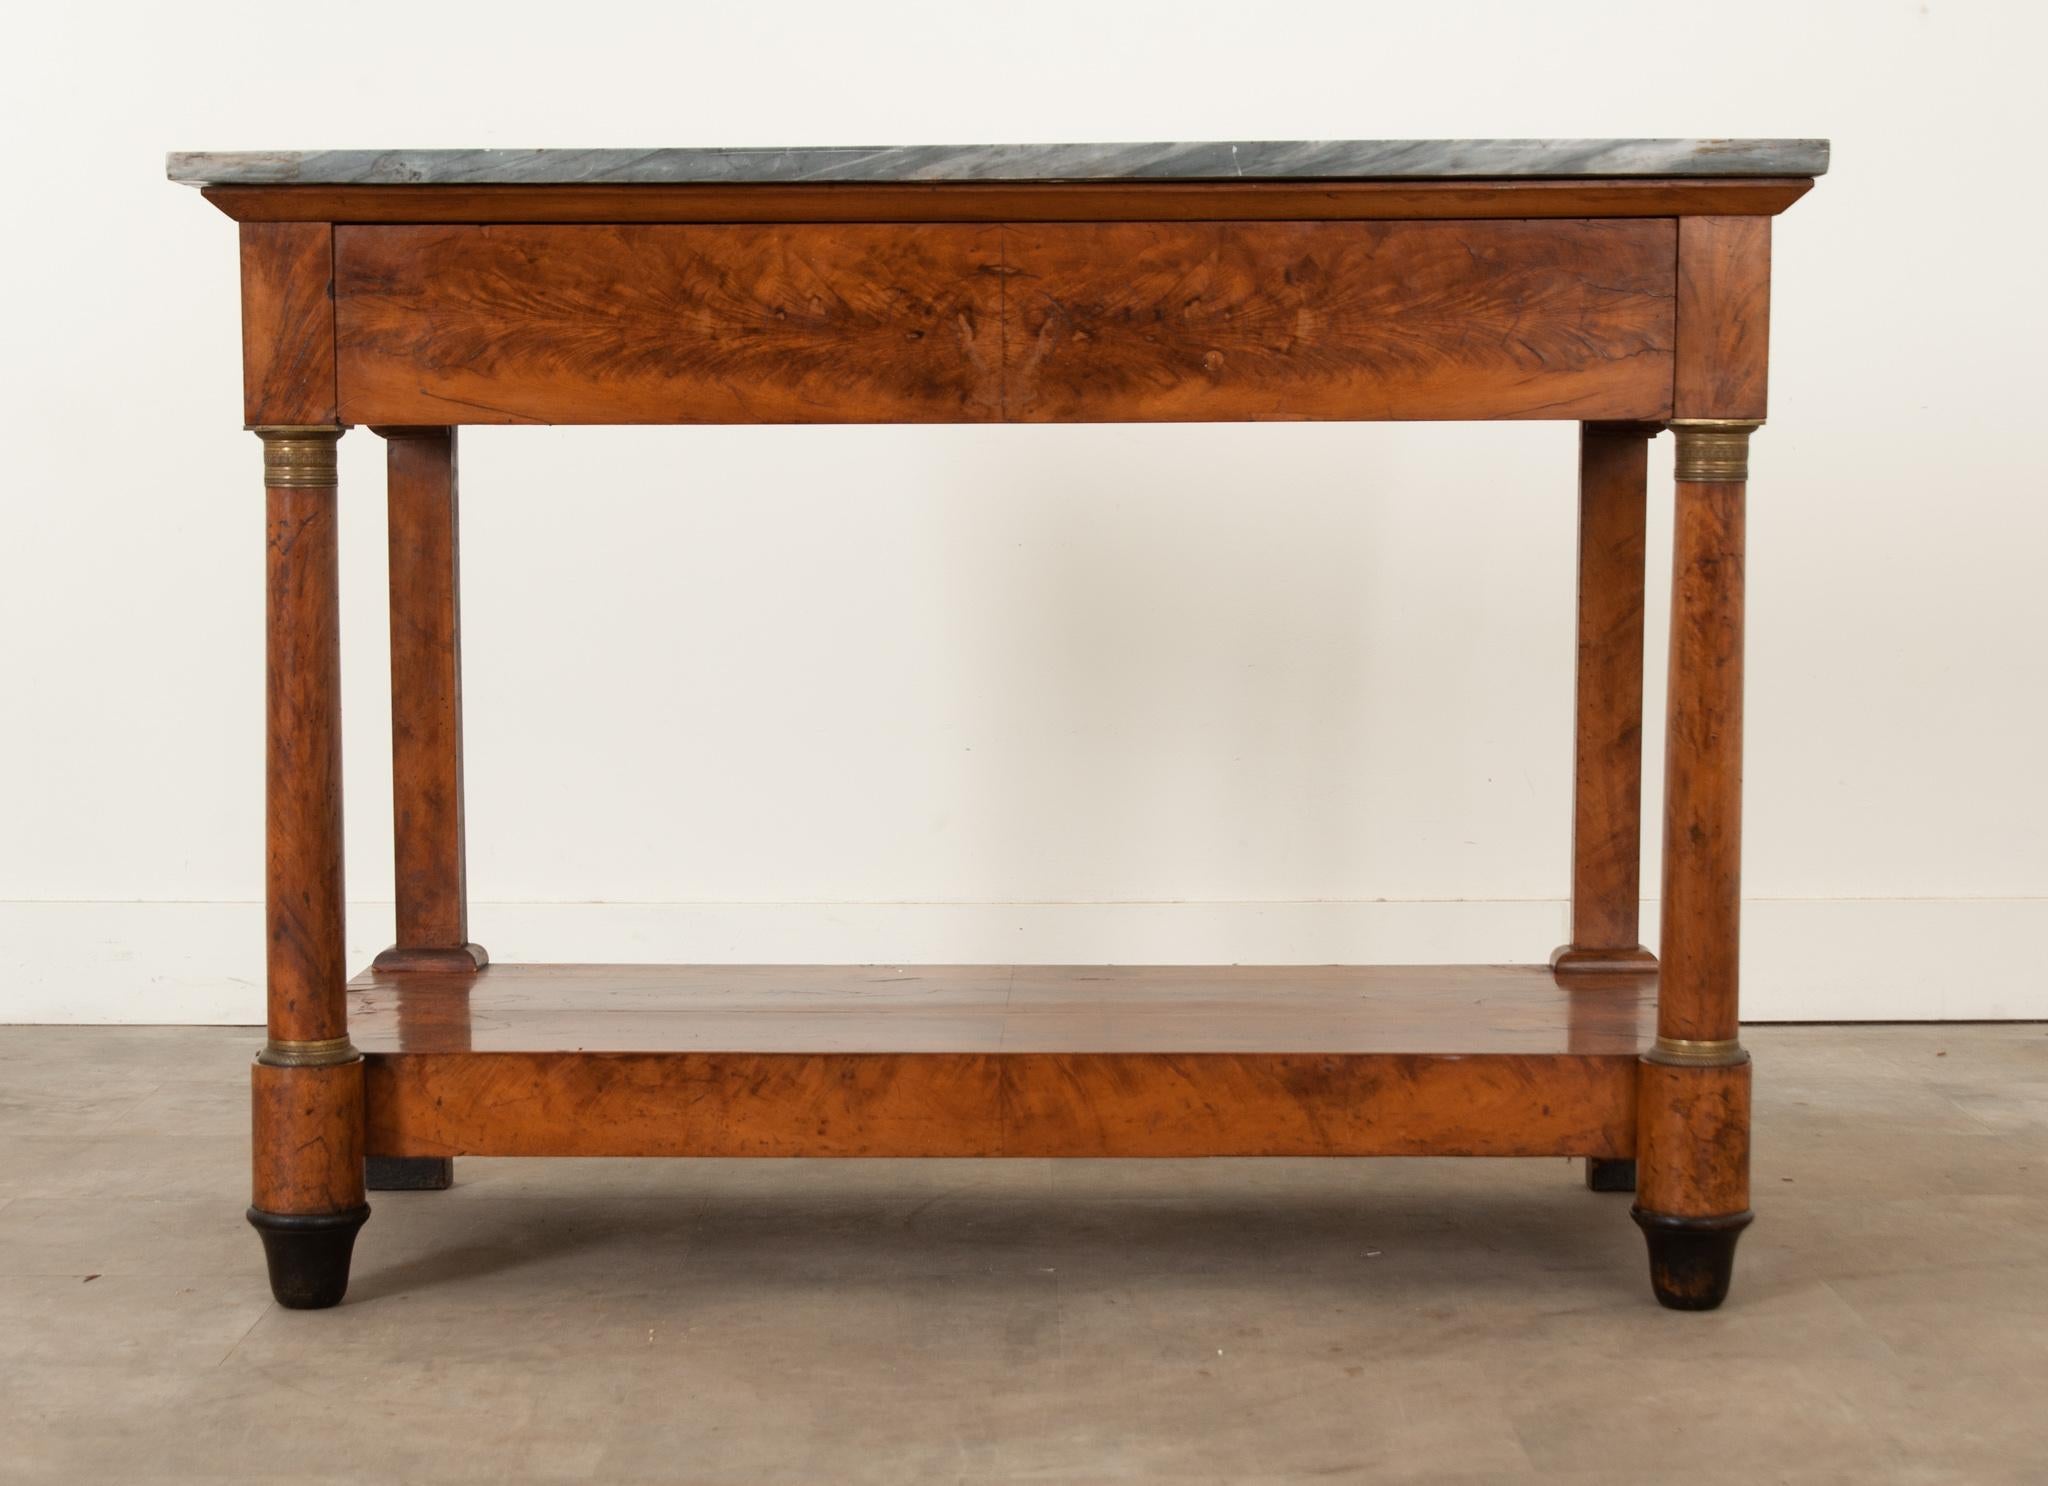 This French 19th Century bookmatched flame mahogany console has its original charcoal marble top that fits over the base. Column-form front legs support the top along with the console’s more restrained, finished linear rear legs. The front legs are